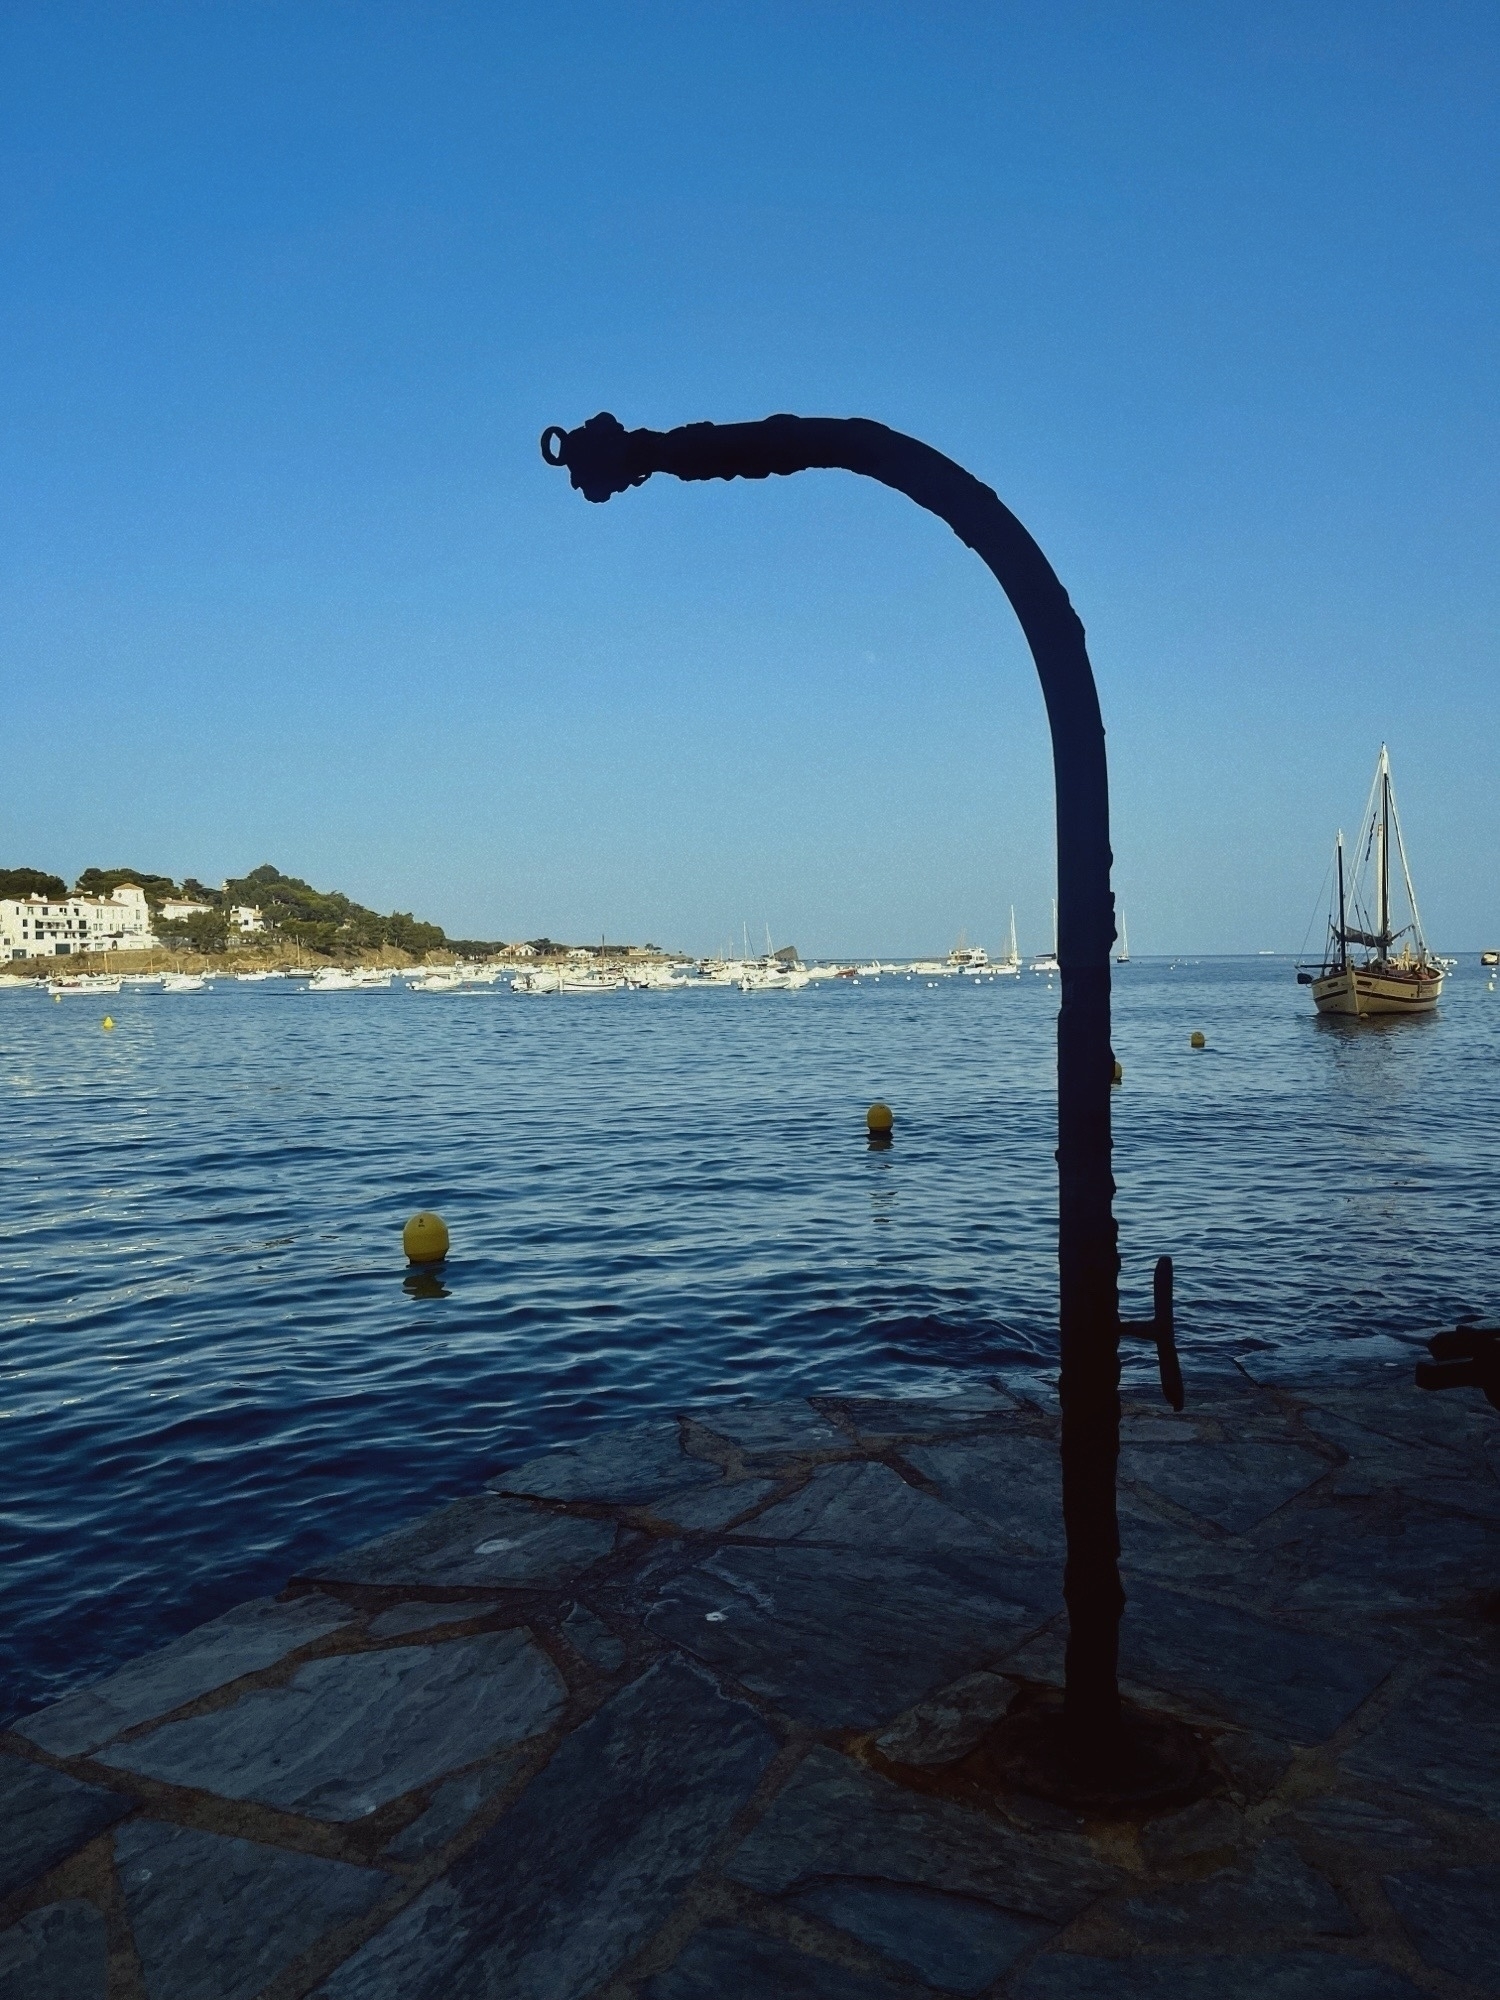 A metallic “L” shaped object standing upright on the water’s edge. Behind is an ocean bay with an old sail boat anchored off shore